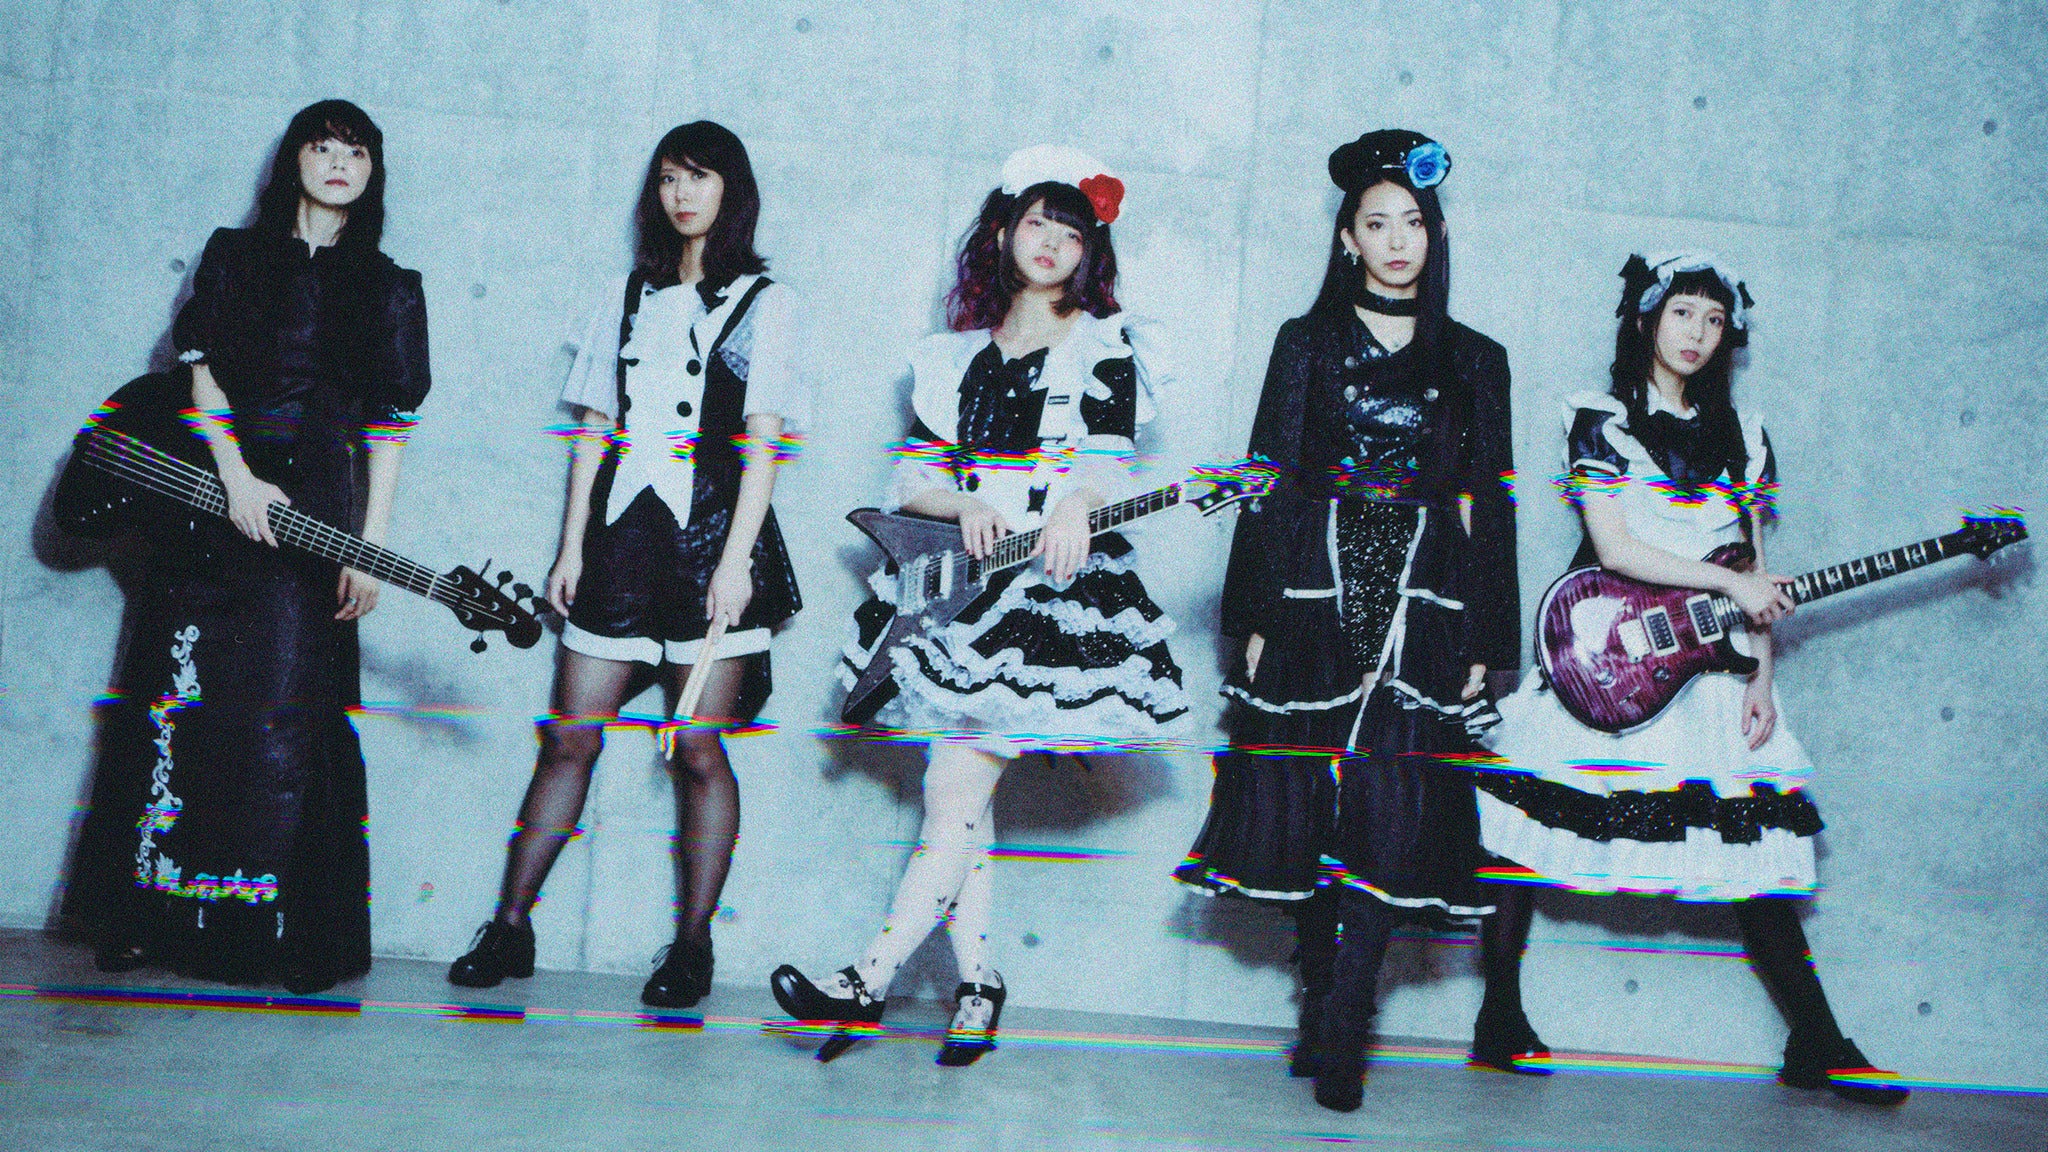 BAND-MAID US Tour 2022 – MOVED TO HOUSE OF BLUES DALLAS